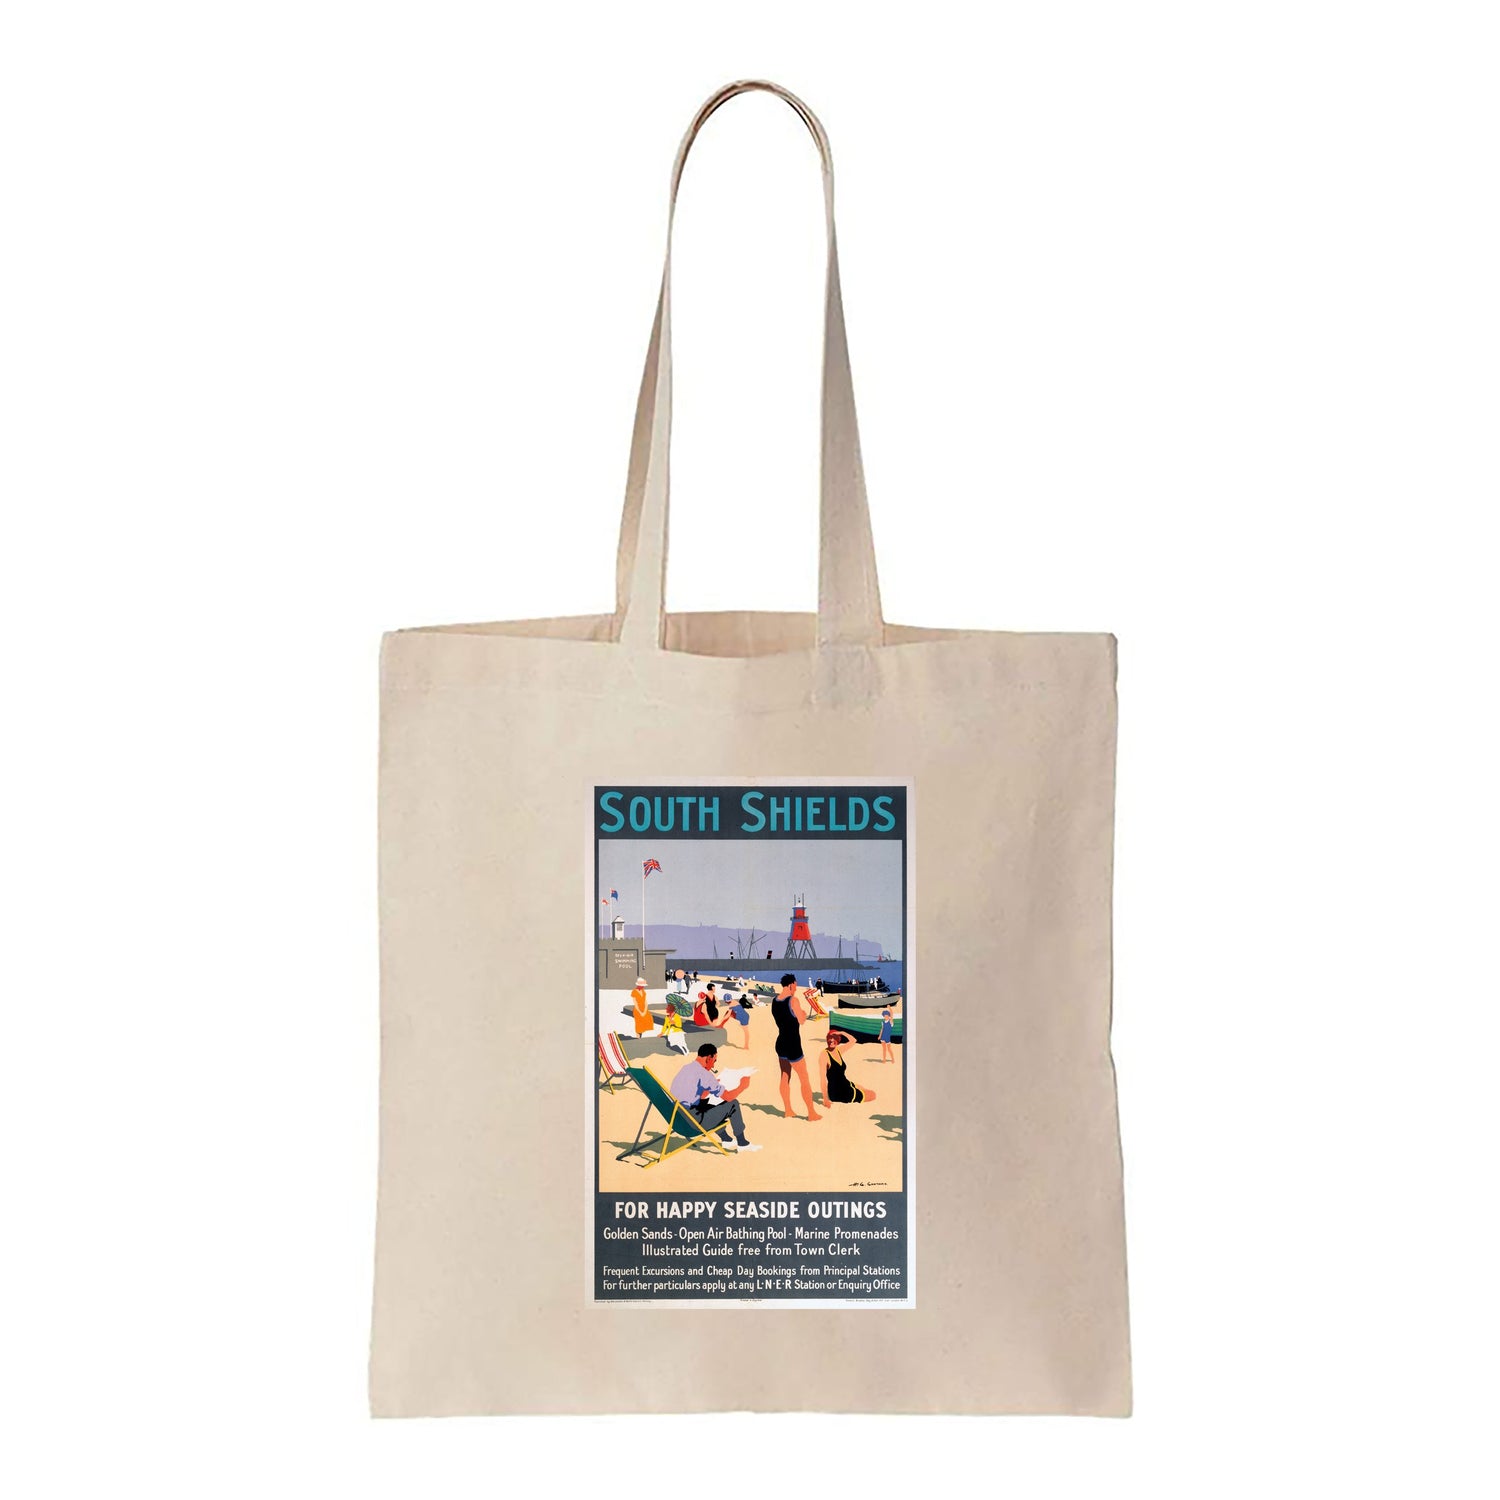 South Shields for Happy Seaside Outings - Canvas Tote Bag